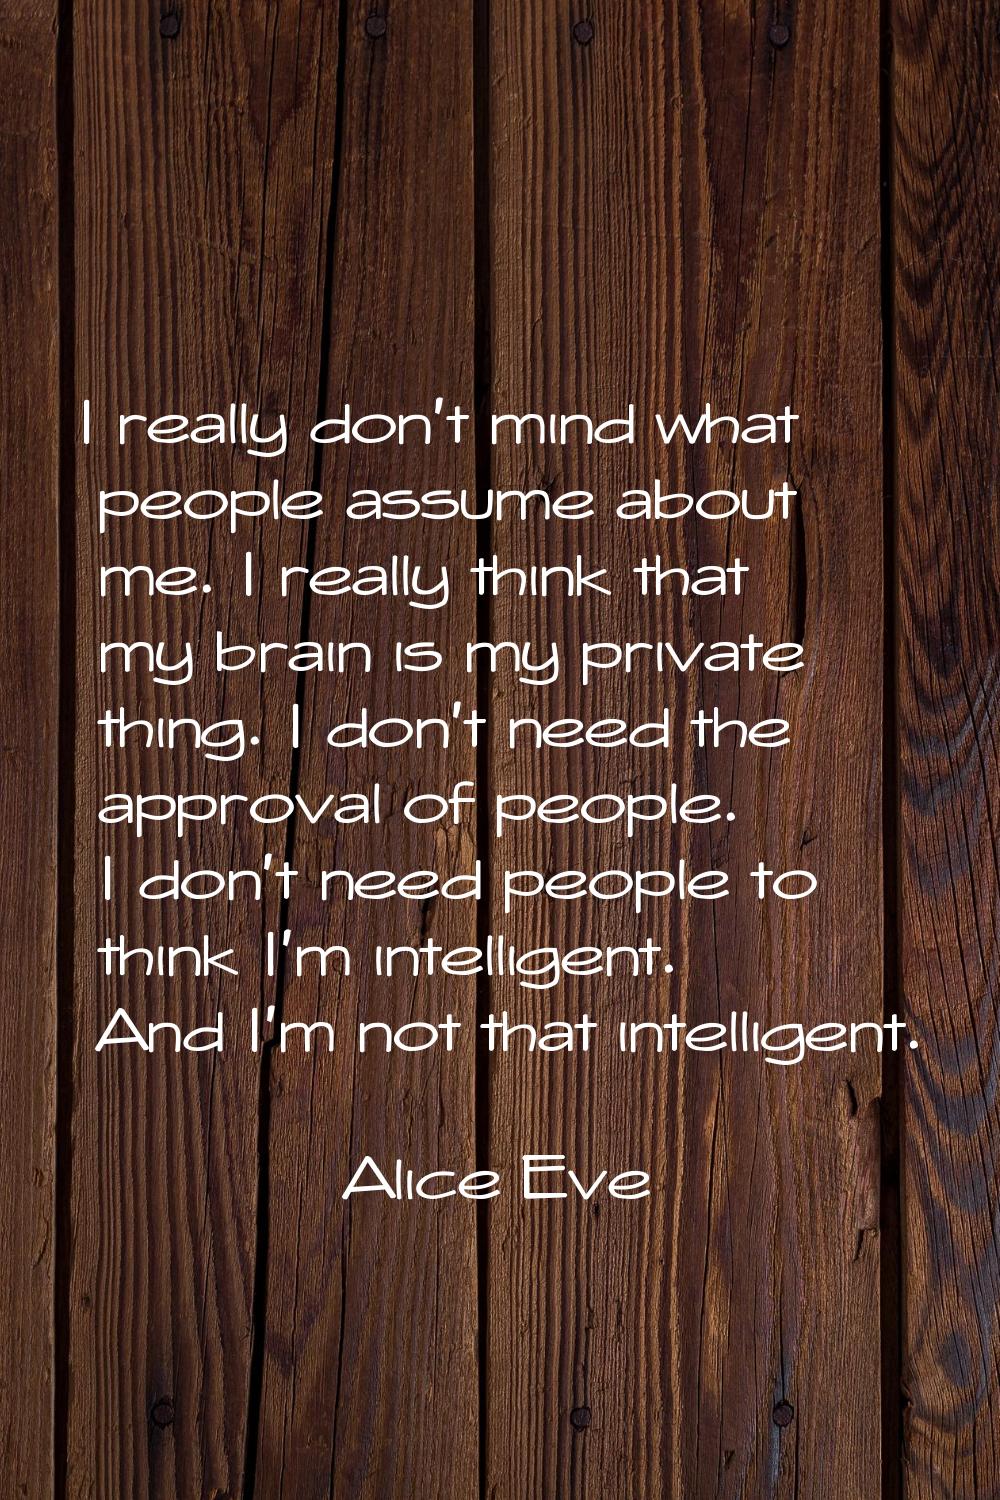 I really don't mind what people assume about me. I really think that my brain is my private thing. 